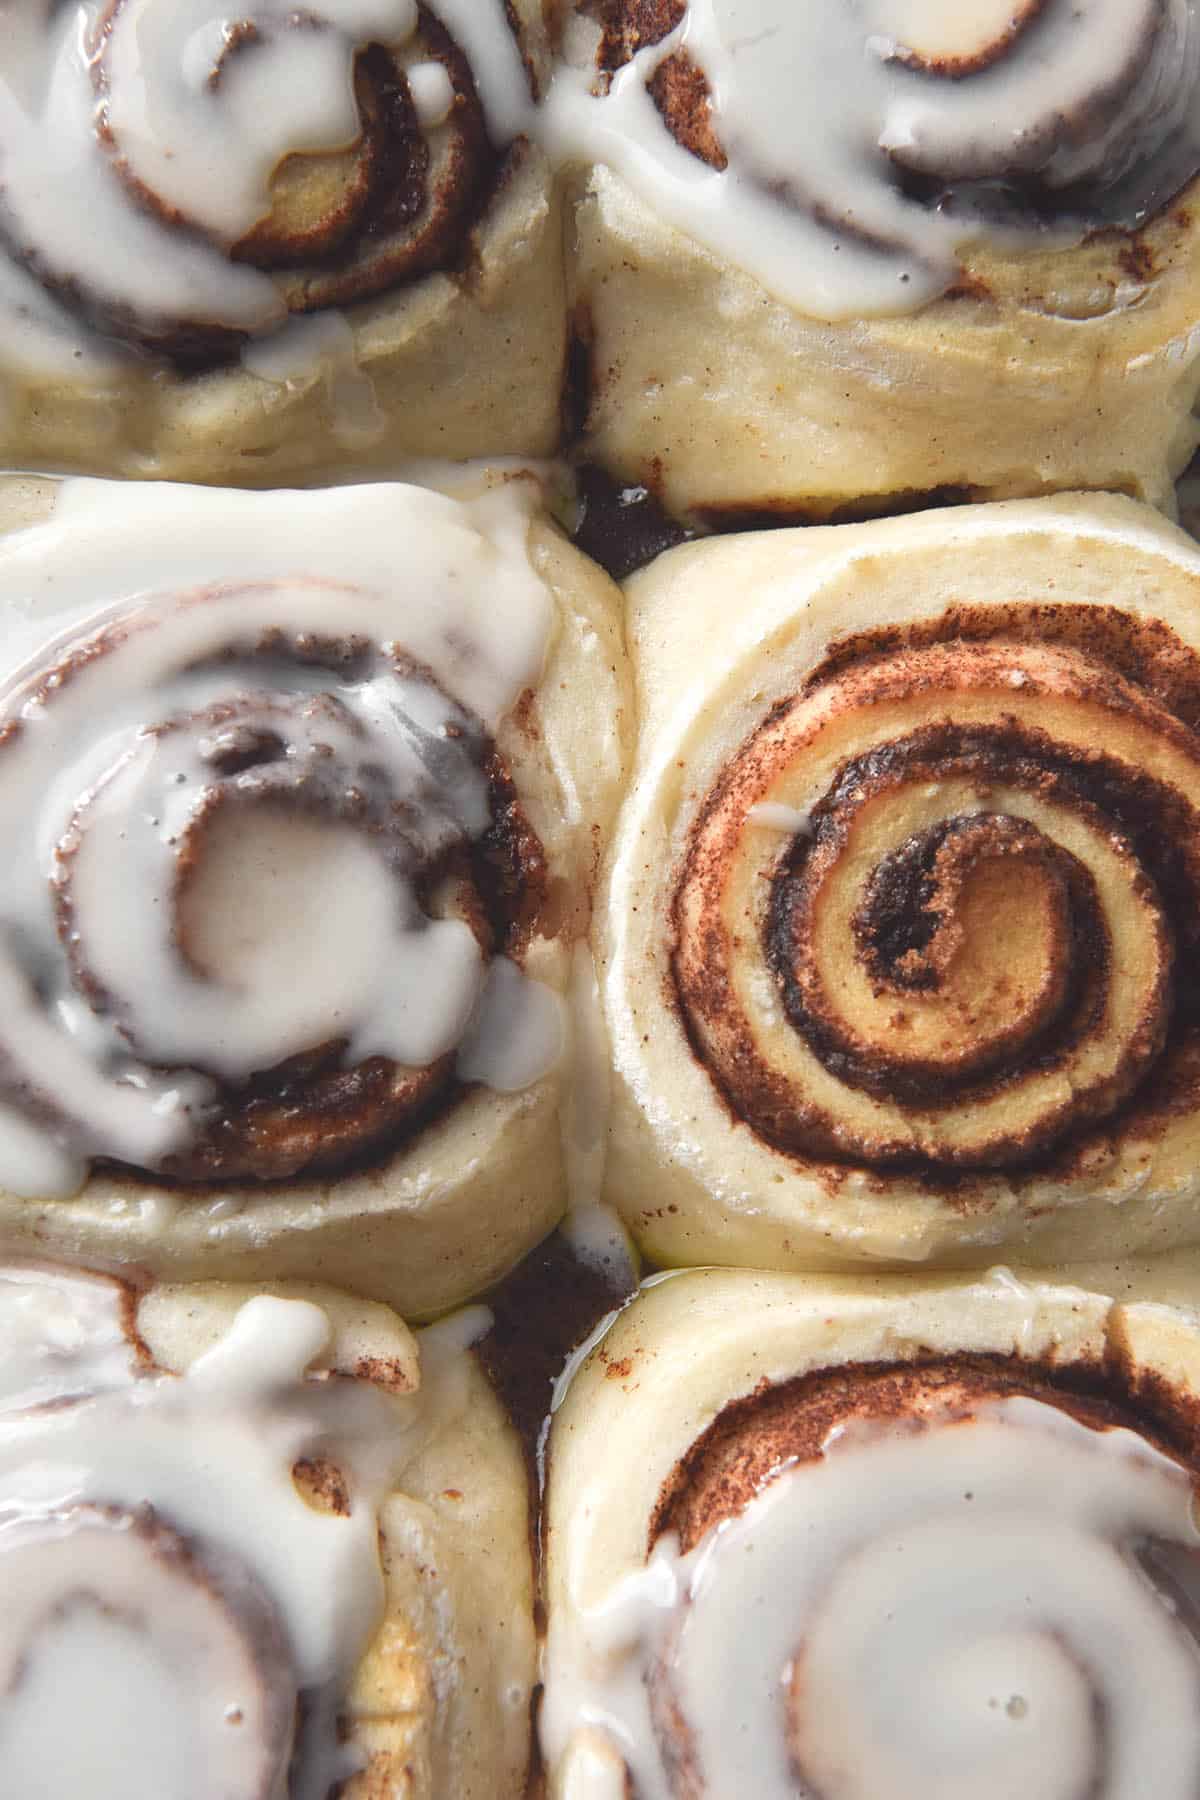 An aerial view of a tray of gluten free, vegan and yeast free cinnamon scrolls. Six scrolls sit snug in the tray with rich swirls of cinnamon and brown sugar. Most of the scrolls have been drizzled with a cinnamon scroll glaze, which melts into the scroll. 